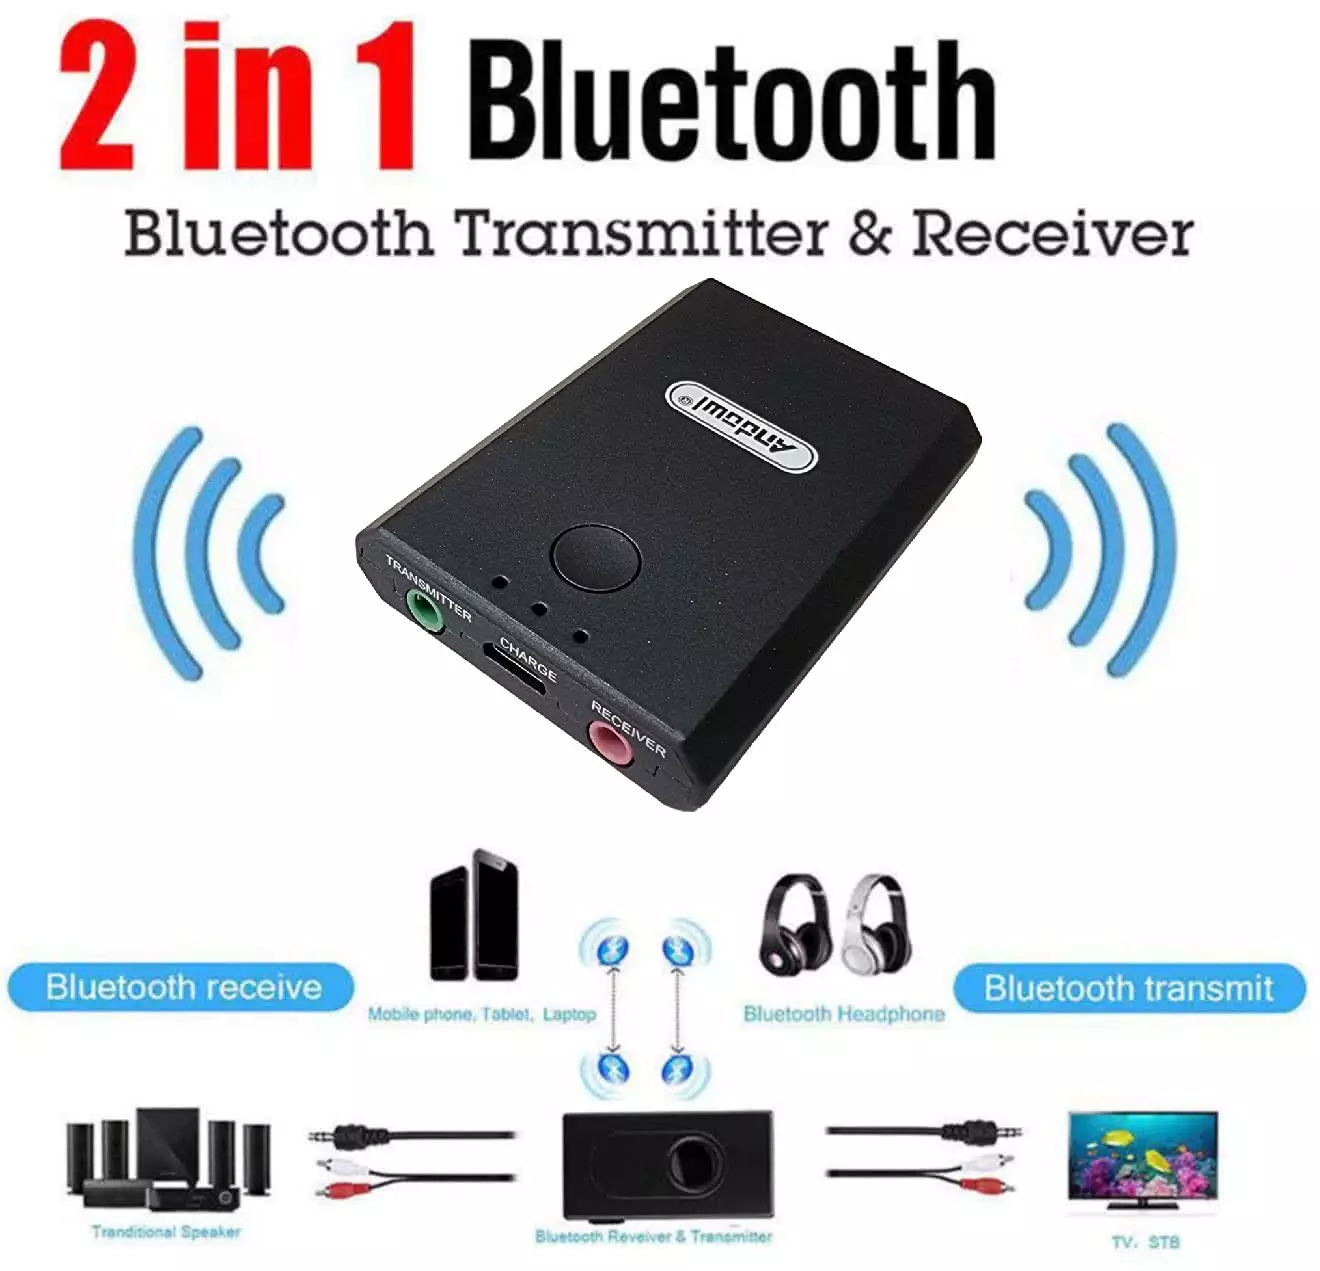 2in1 Bluetooth Transmitter Receiver USB Wireless Stereo Audio Adapter  Dongle PC